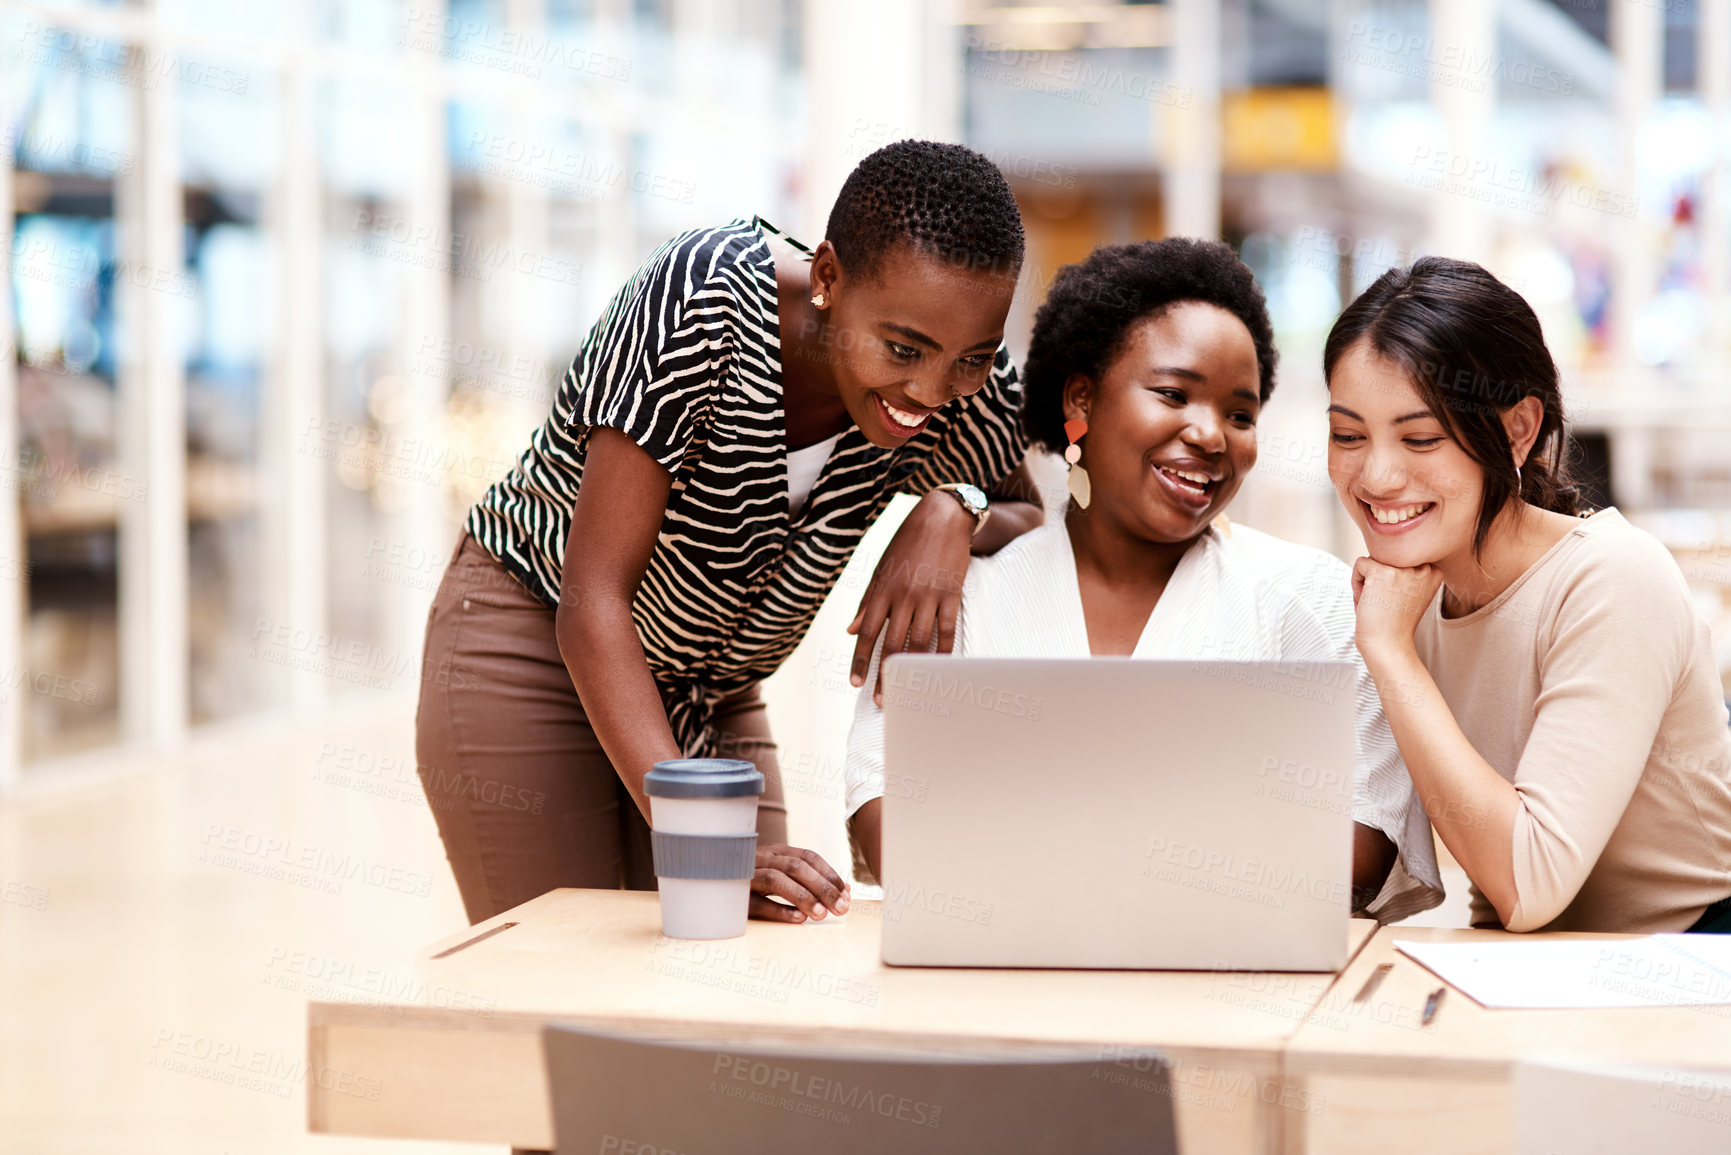 Buy stock photo Shot of a group of businesswomen working on a laptop together in an office